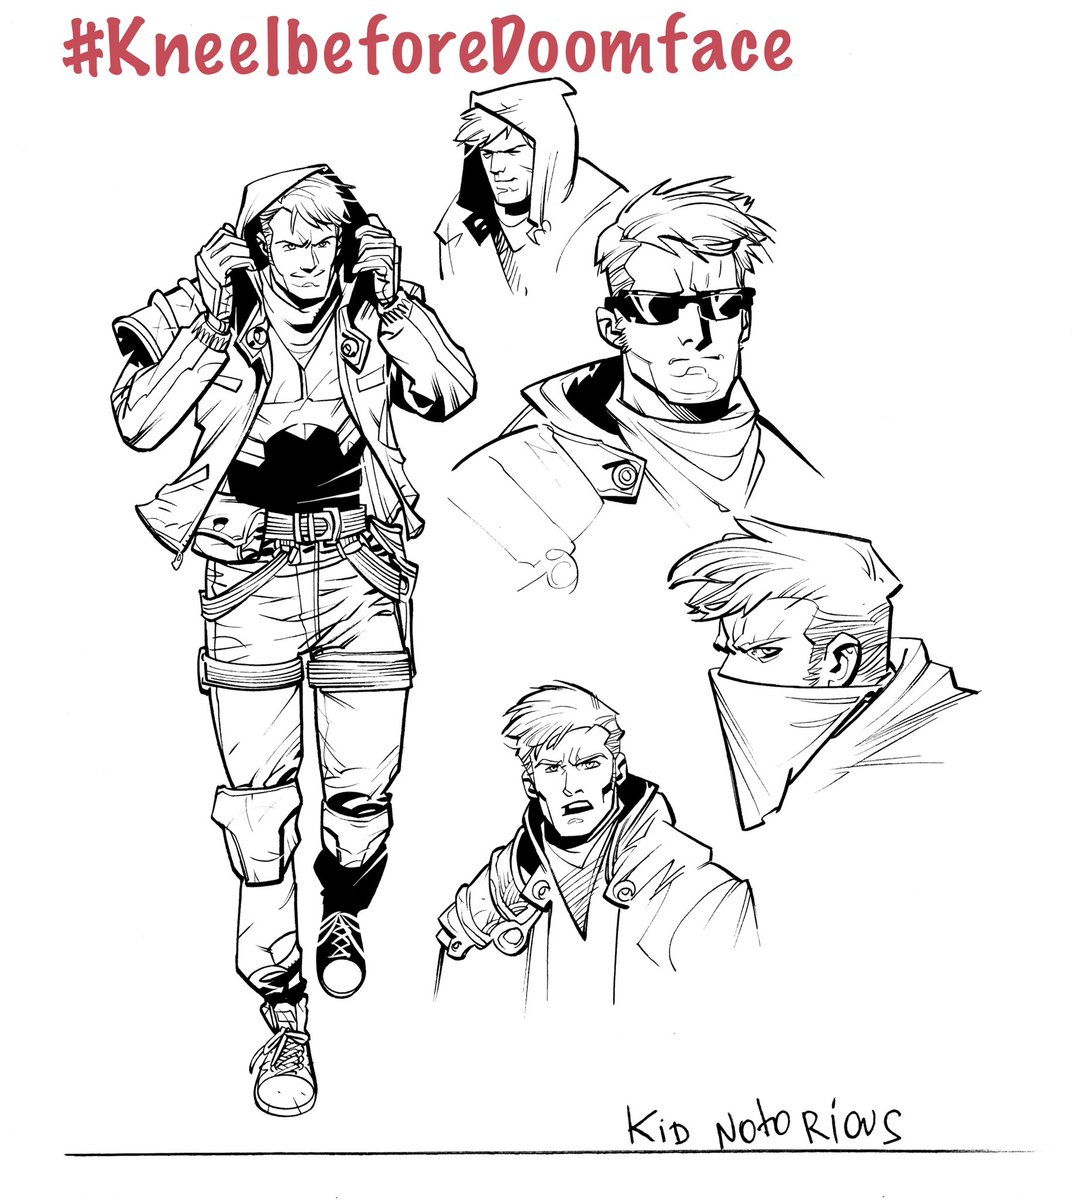 Initial character design for Spam, aka Kid Notorious, one of the two main heroes in #KneelBeforeDoomface, coming soon! #doomface #doomfaceiscoming #Spam #KidNotorious #makecomics #makeindiecomics #crowdfunding #crowdfundingcampaign #crowdfundingcomics